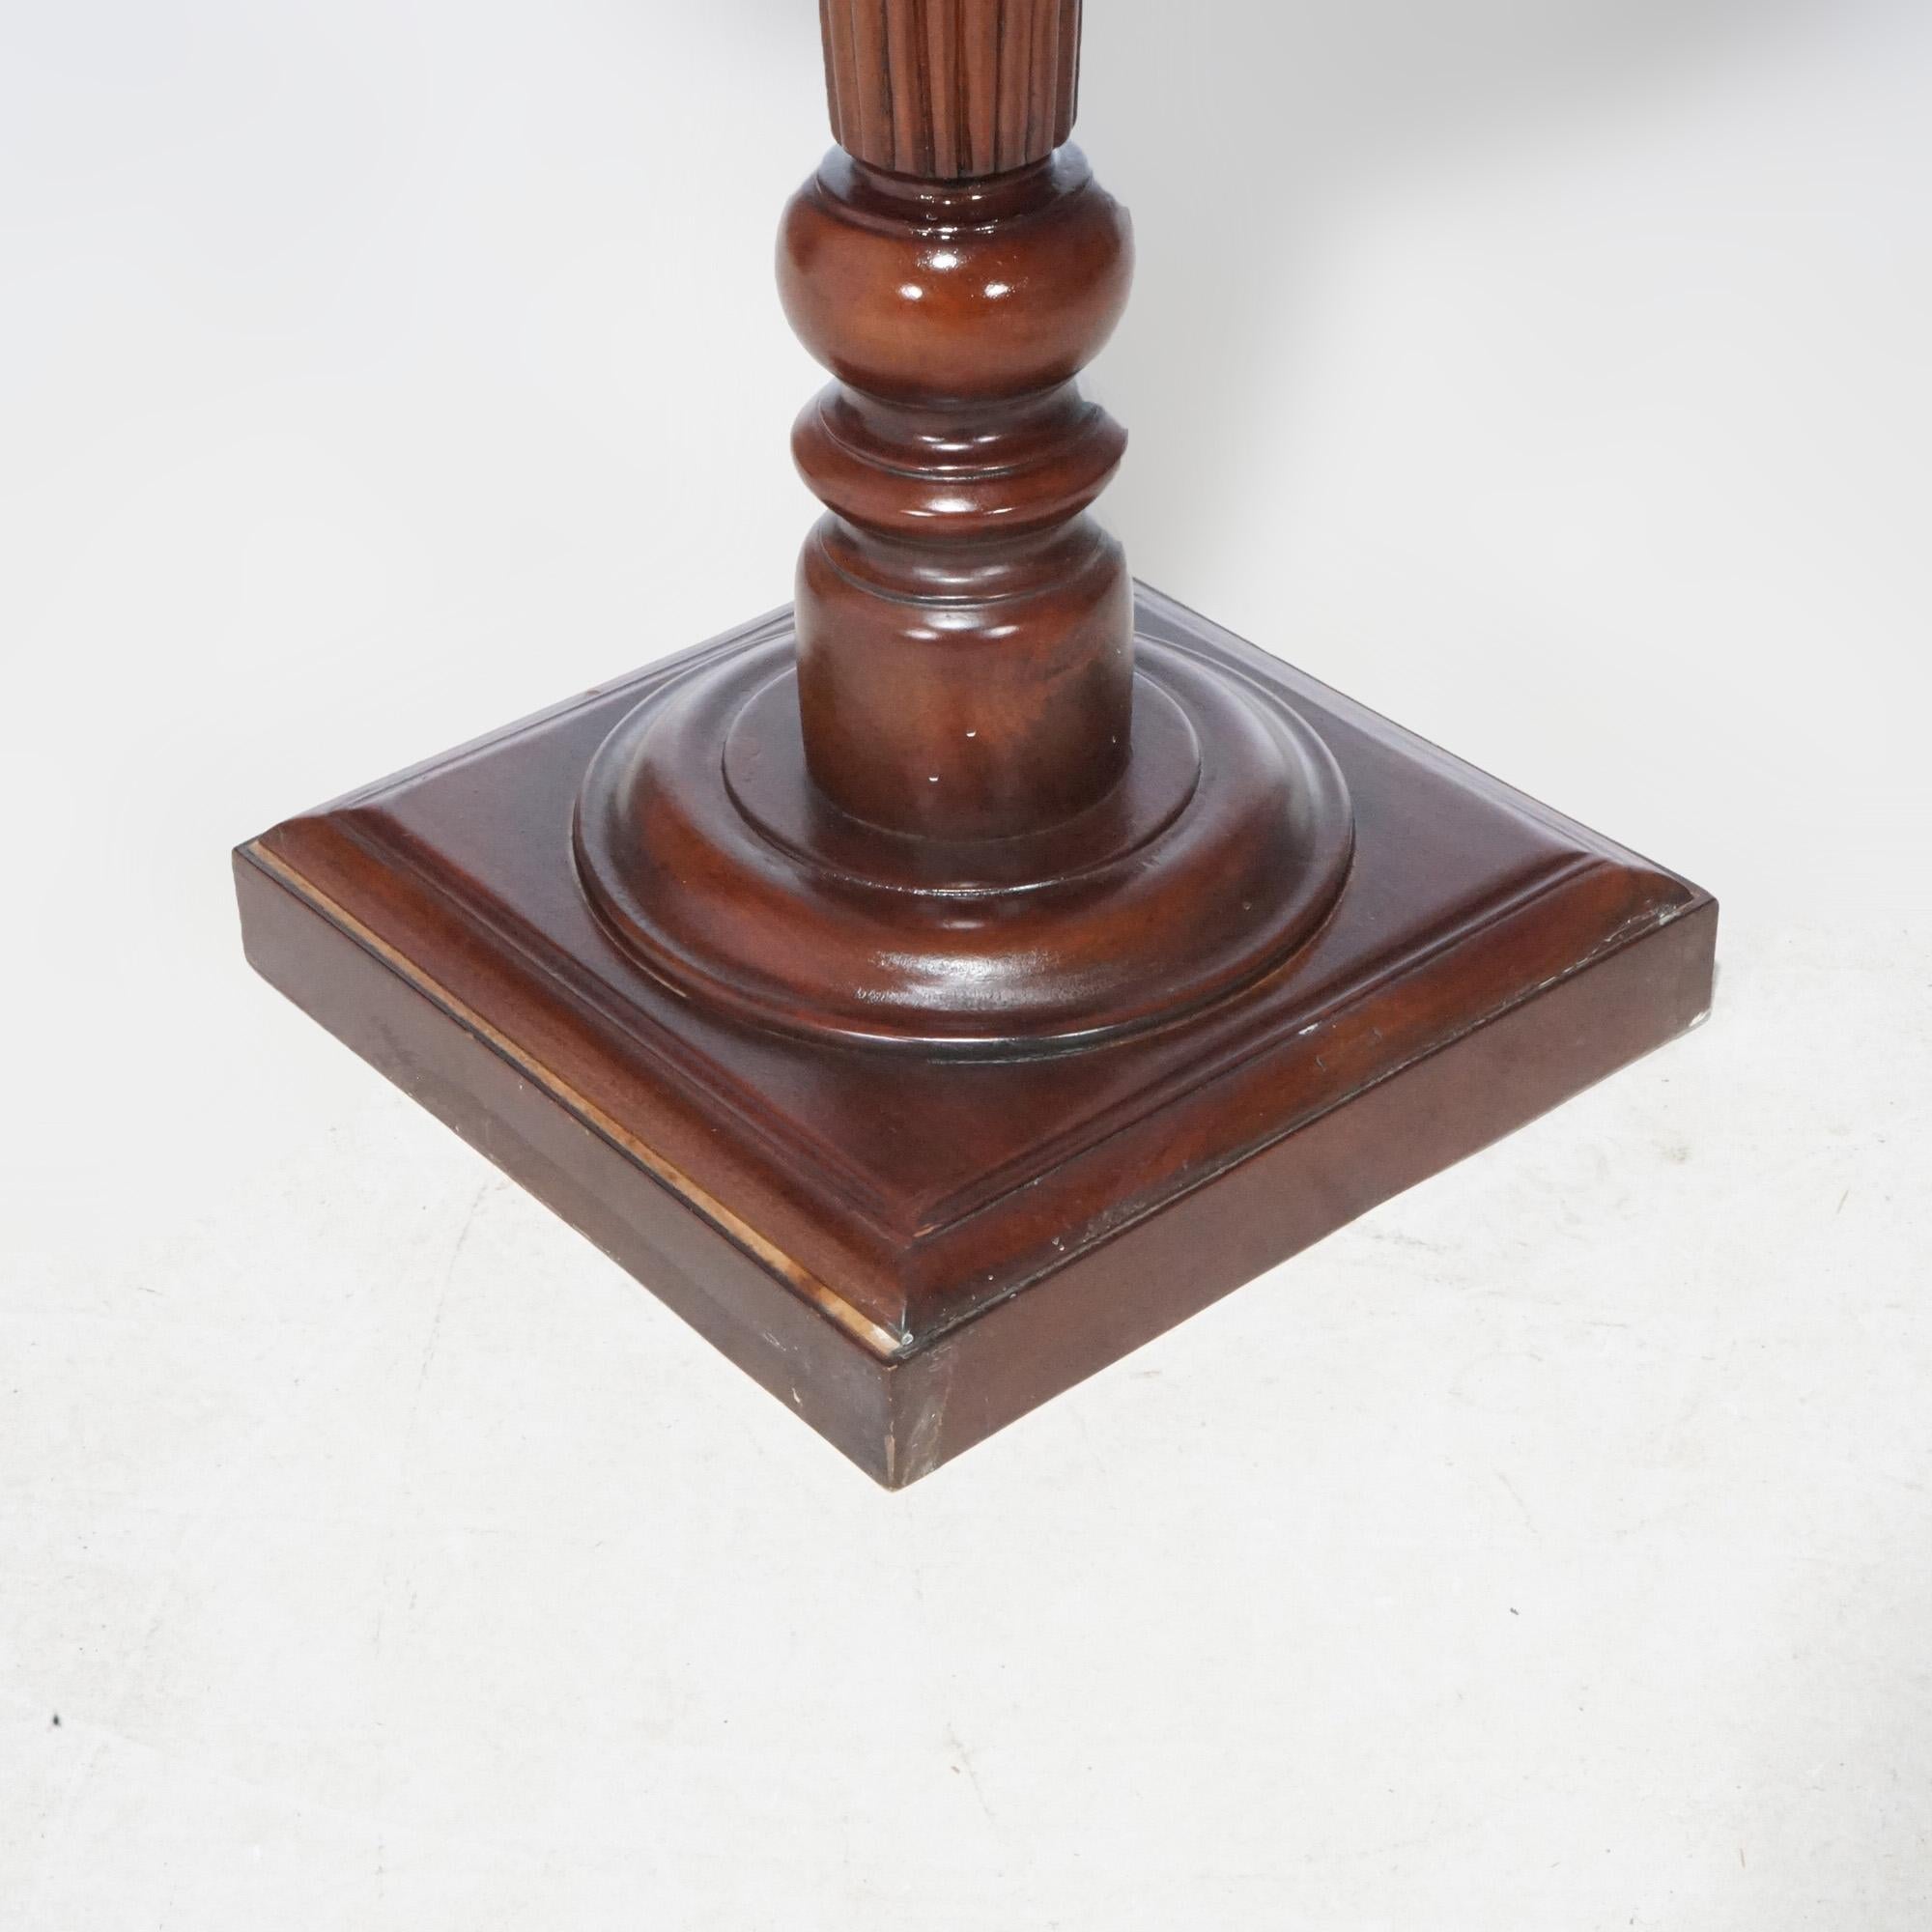 Antique Neoclassical Carved Mahogany Sculpture Display Pedestal, circa 1900 For Sale 6